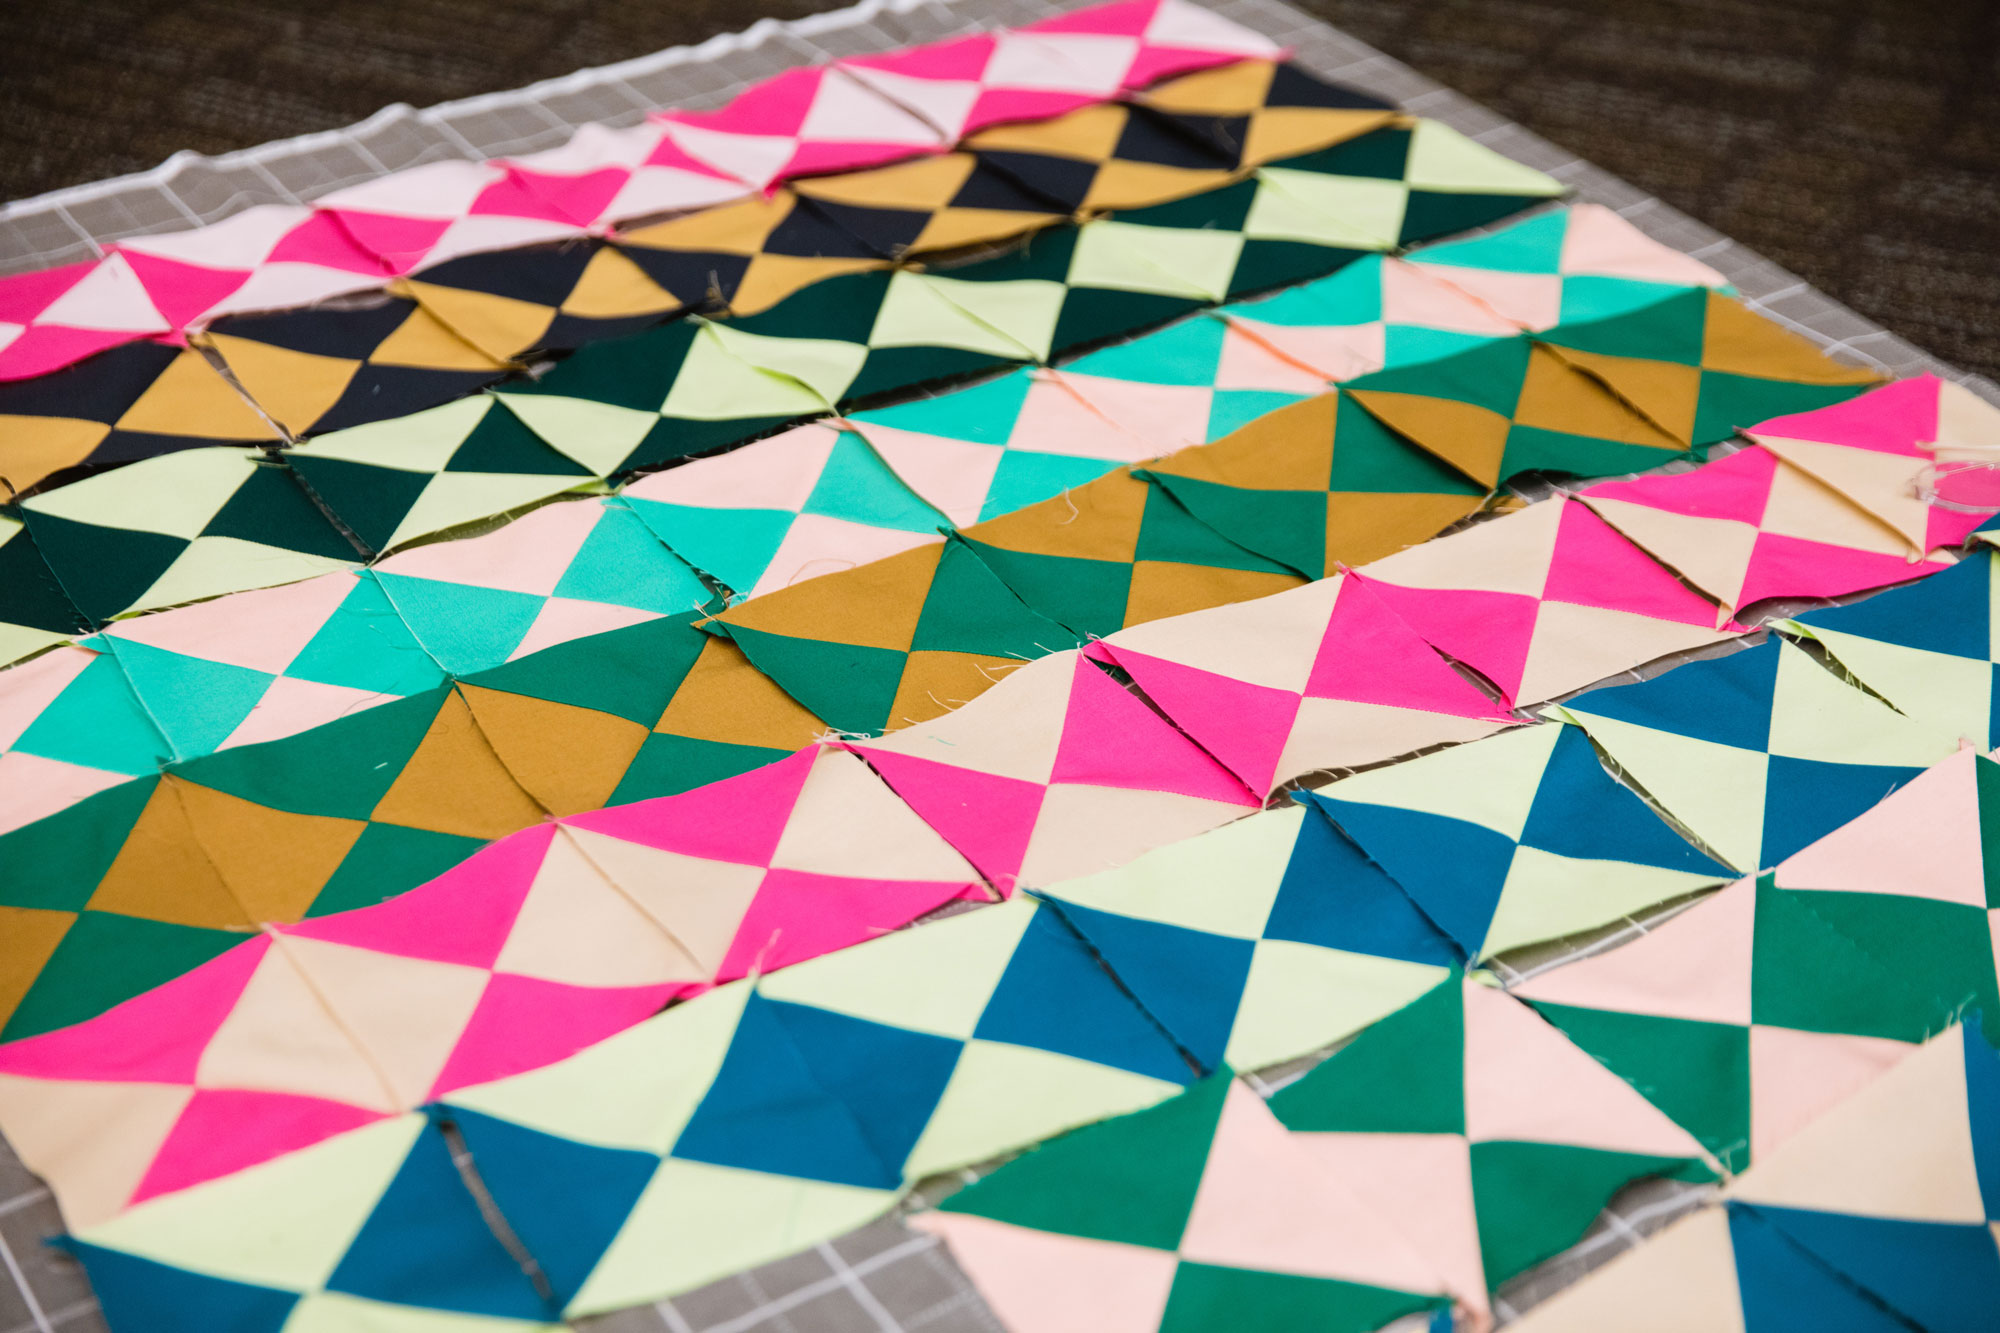 Bright colored hour-glass quilt blocks in pinks, greens, blues